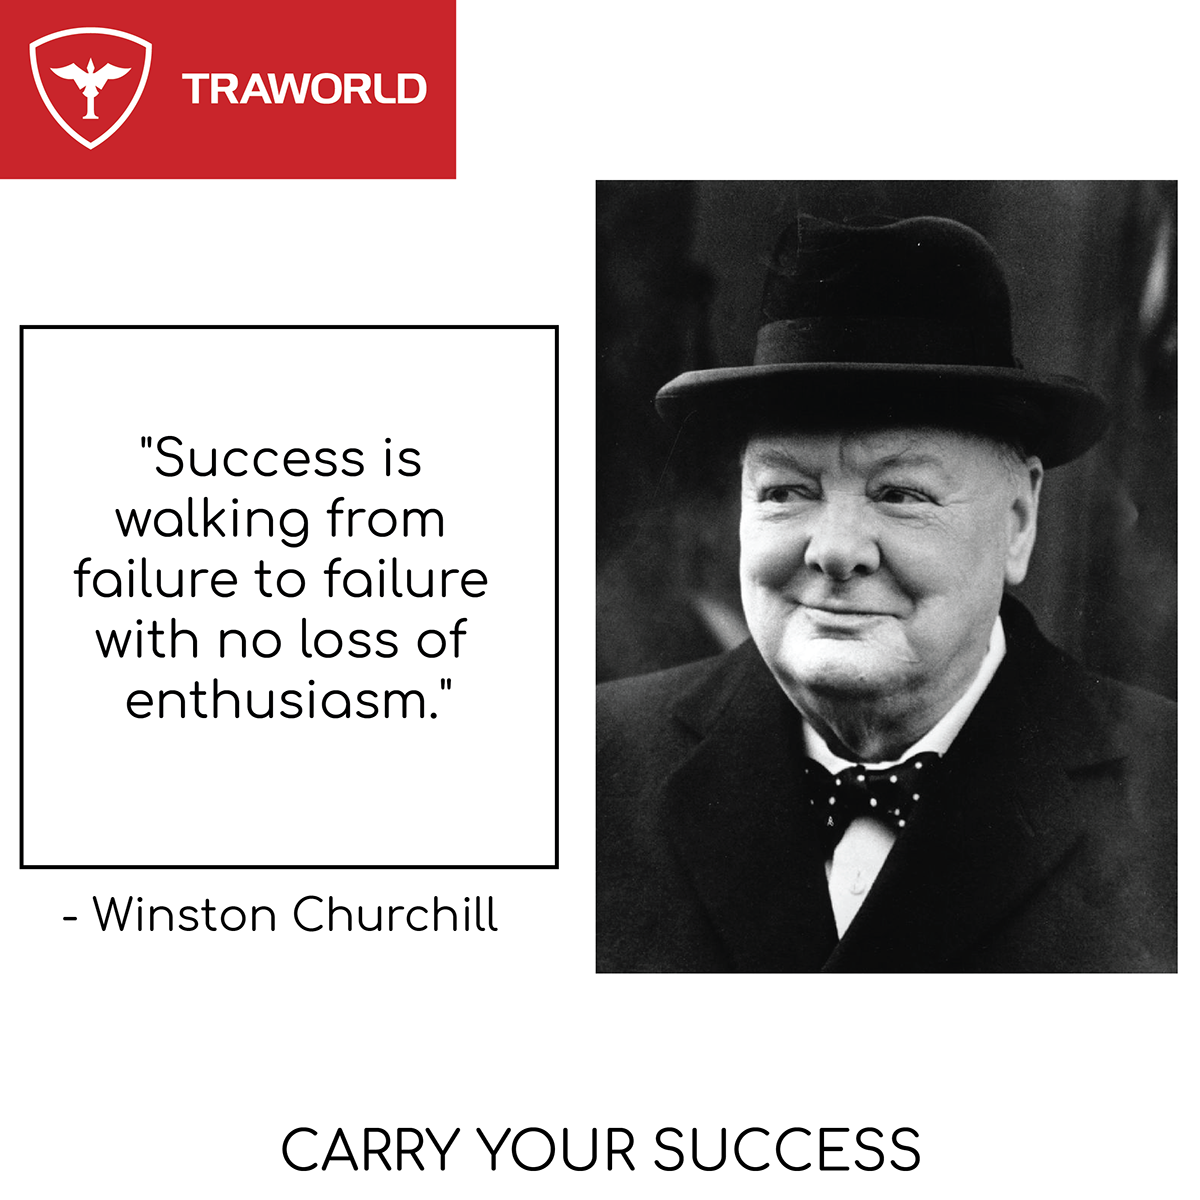 success Traworld social media carry your success successful